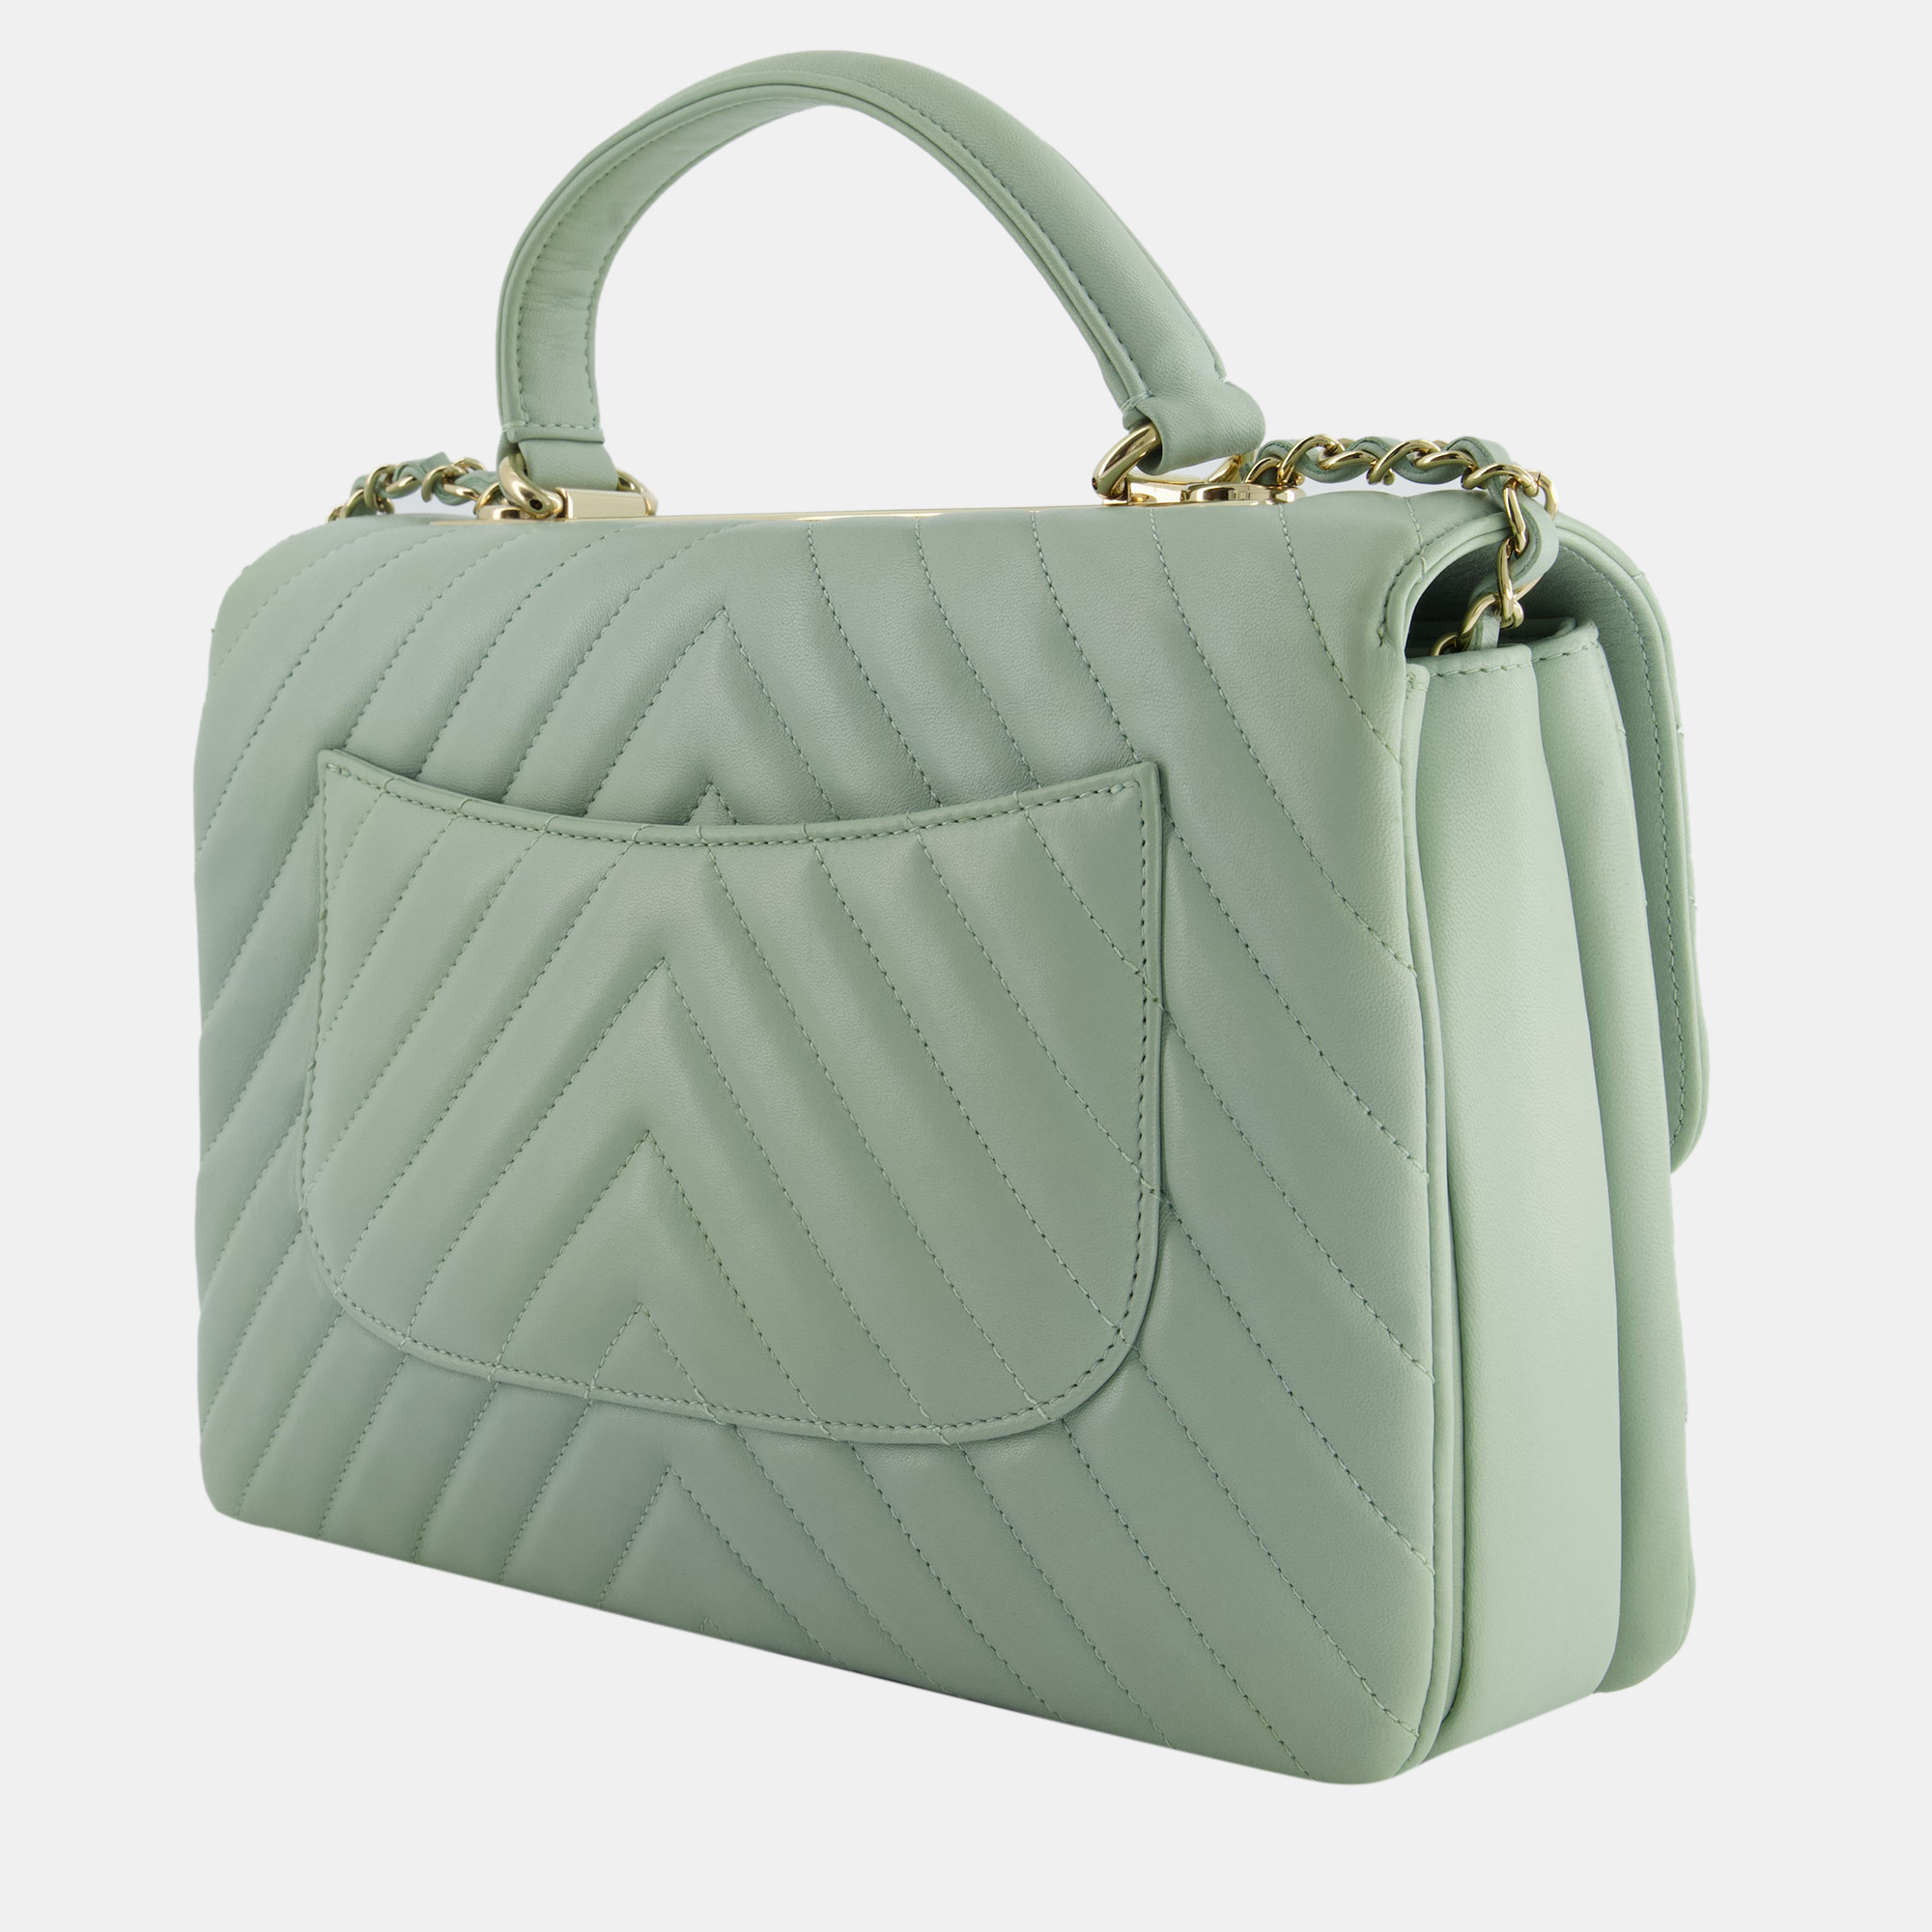 Chanel Pastel Green Trendy CC Flap Bag In Chevron Lambskin With Champagne Gold Hardware